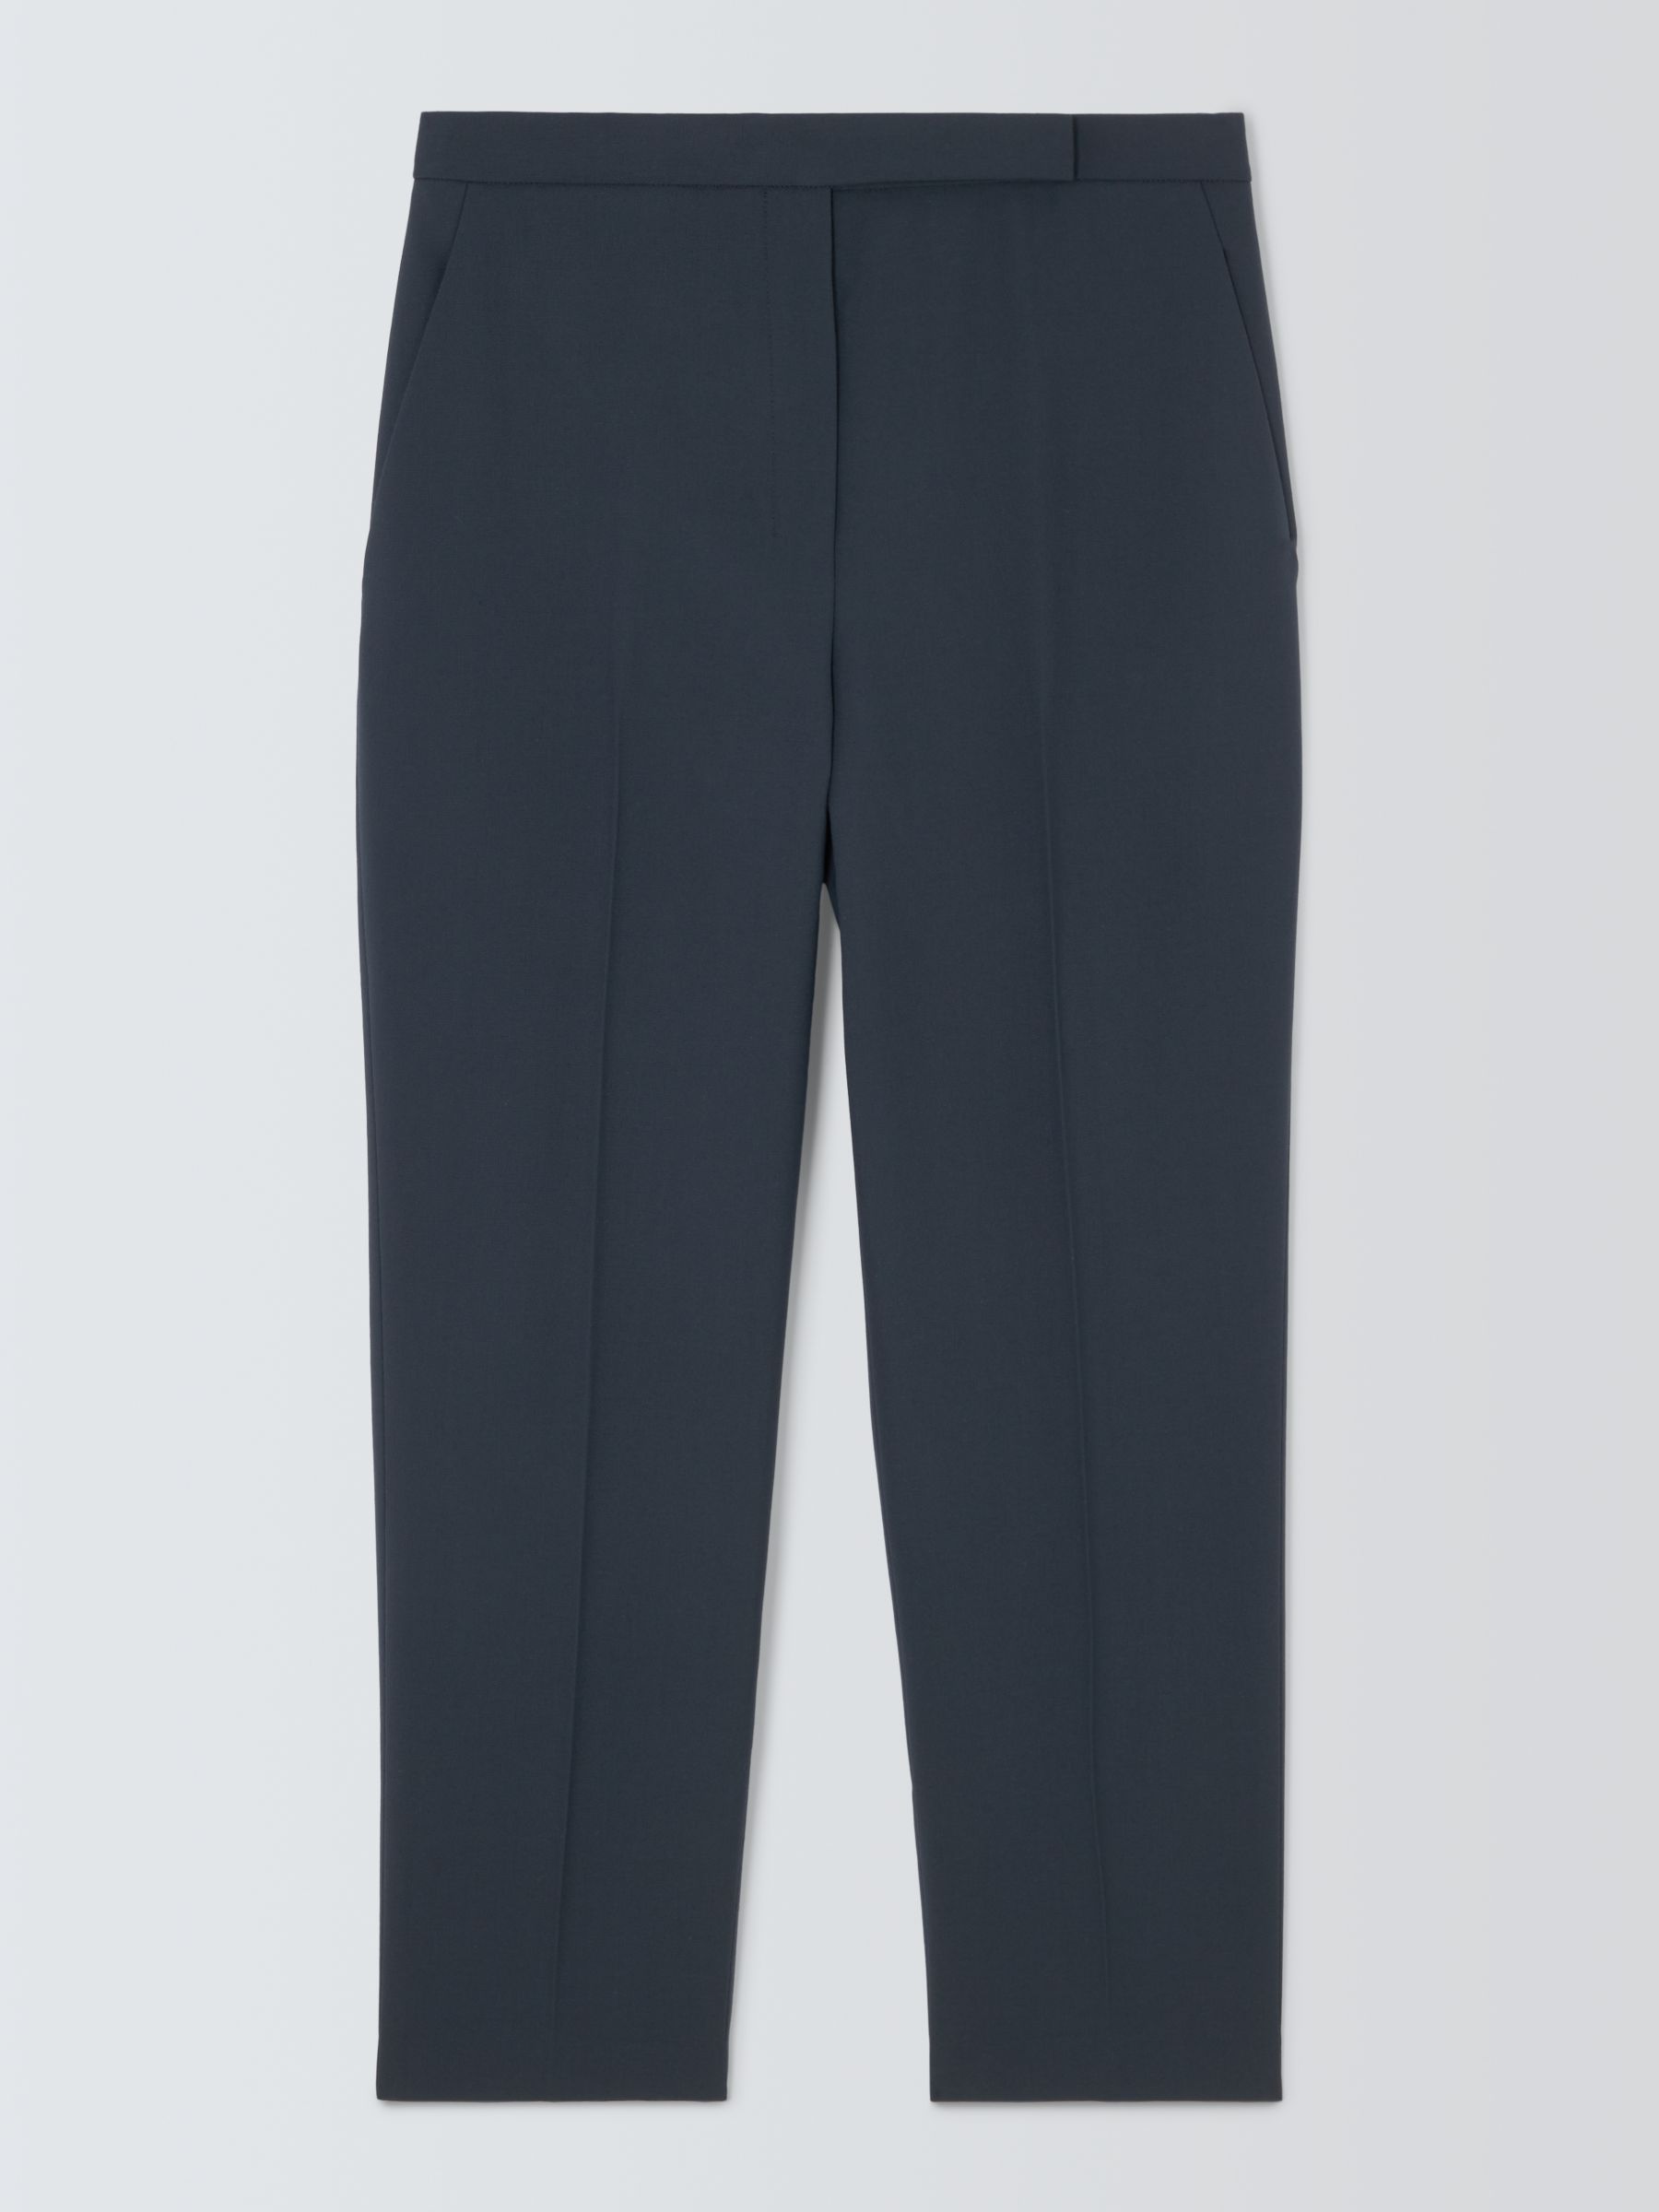 Buy Theory Slim Leg Cropped Trousers Online at johnlewis.com